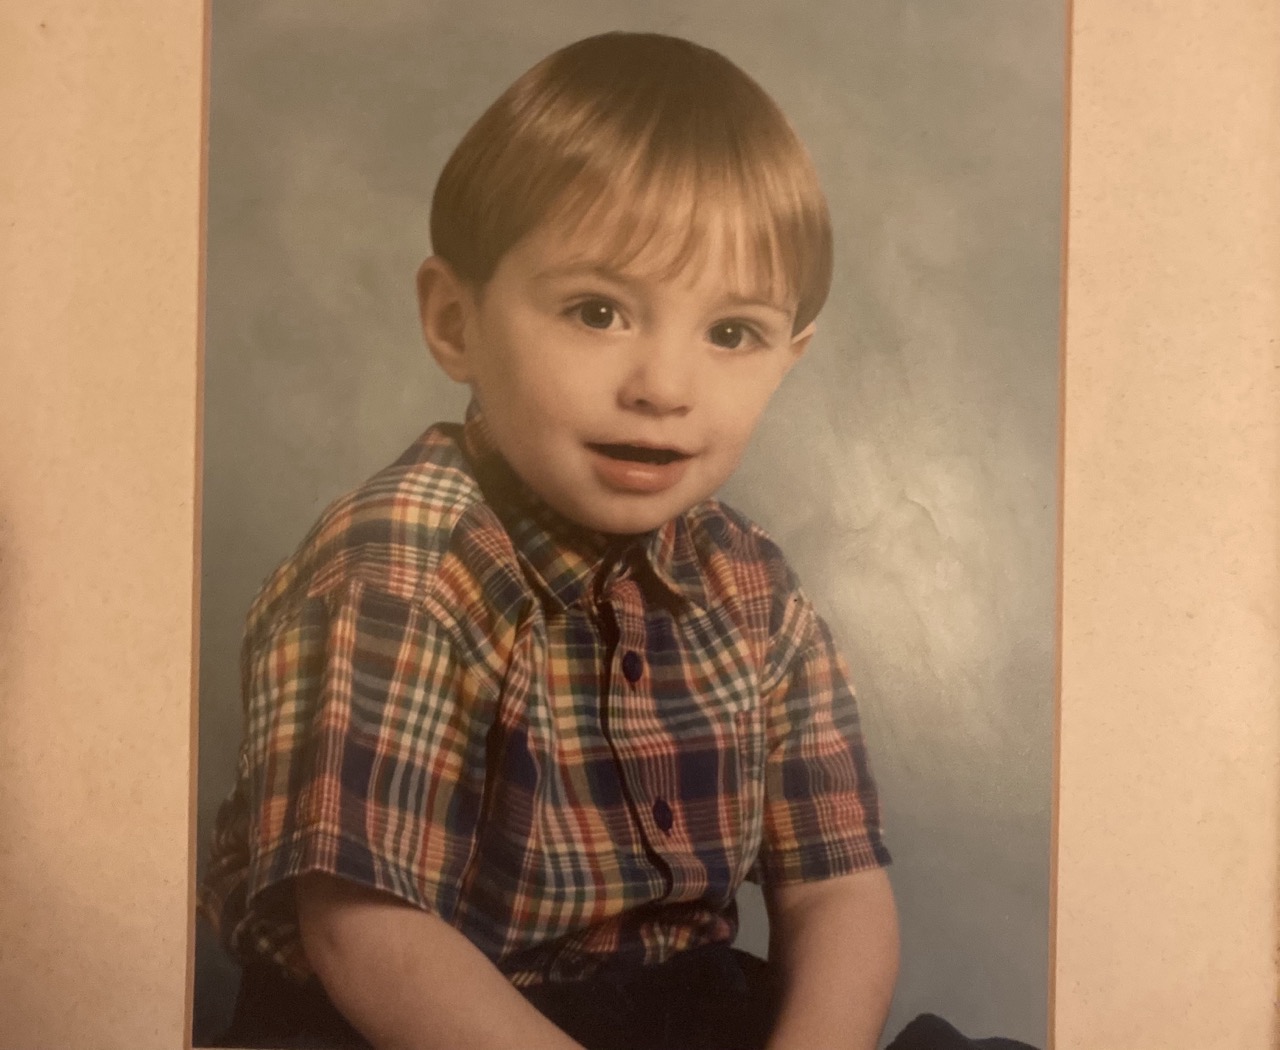 A photo of Jack, aged three years old. He is siting down, wearing a short sleeve plaid shirt. He is smiling at the camera.